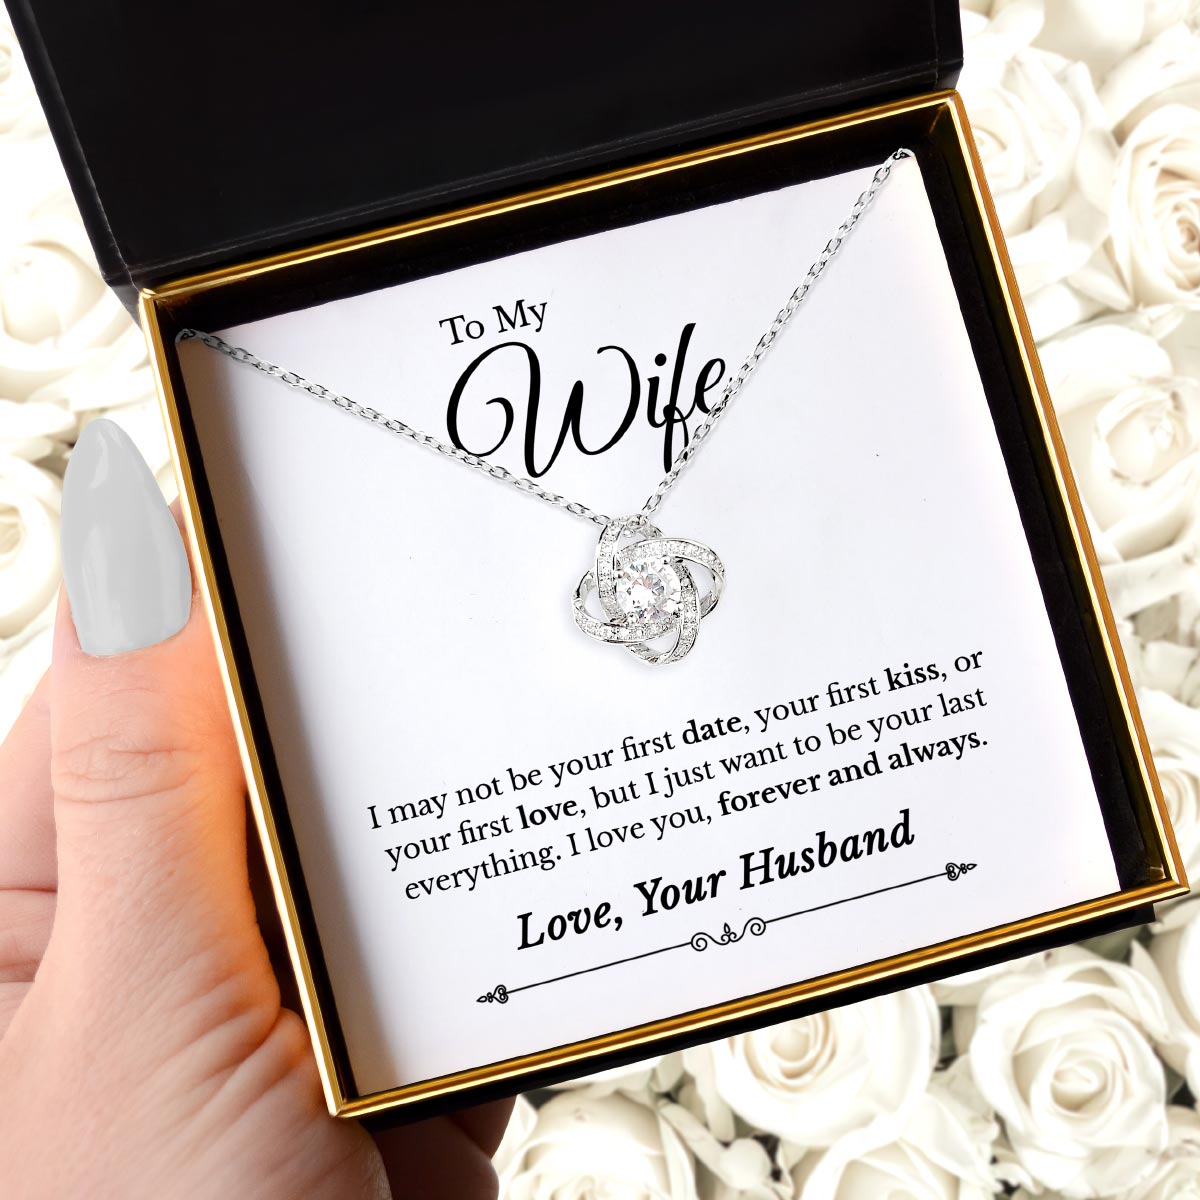 To My Wife, I May Not Be Your First Date - Silver Love Knot Necklace Gift Set